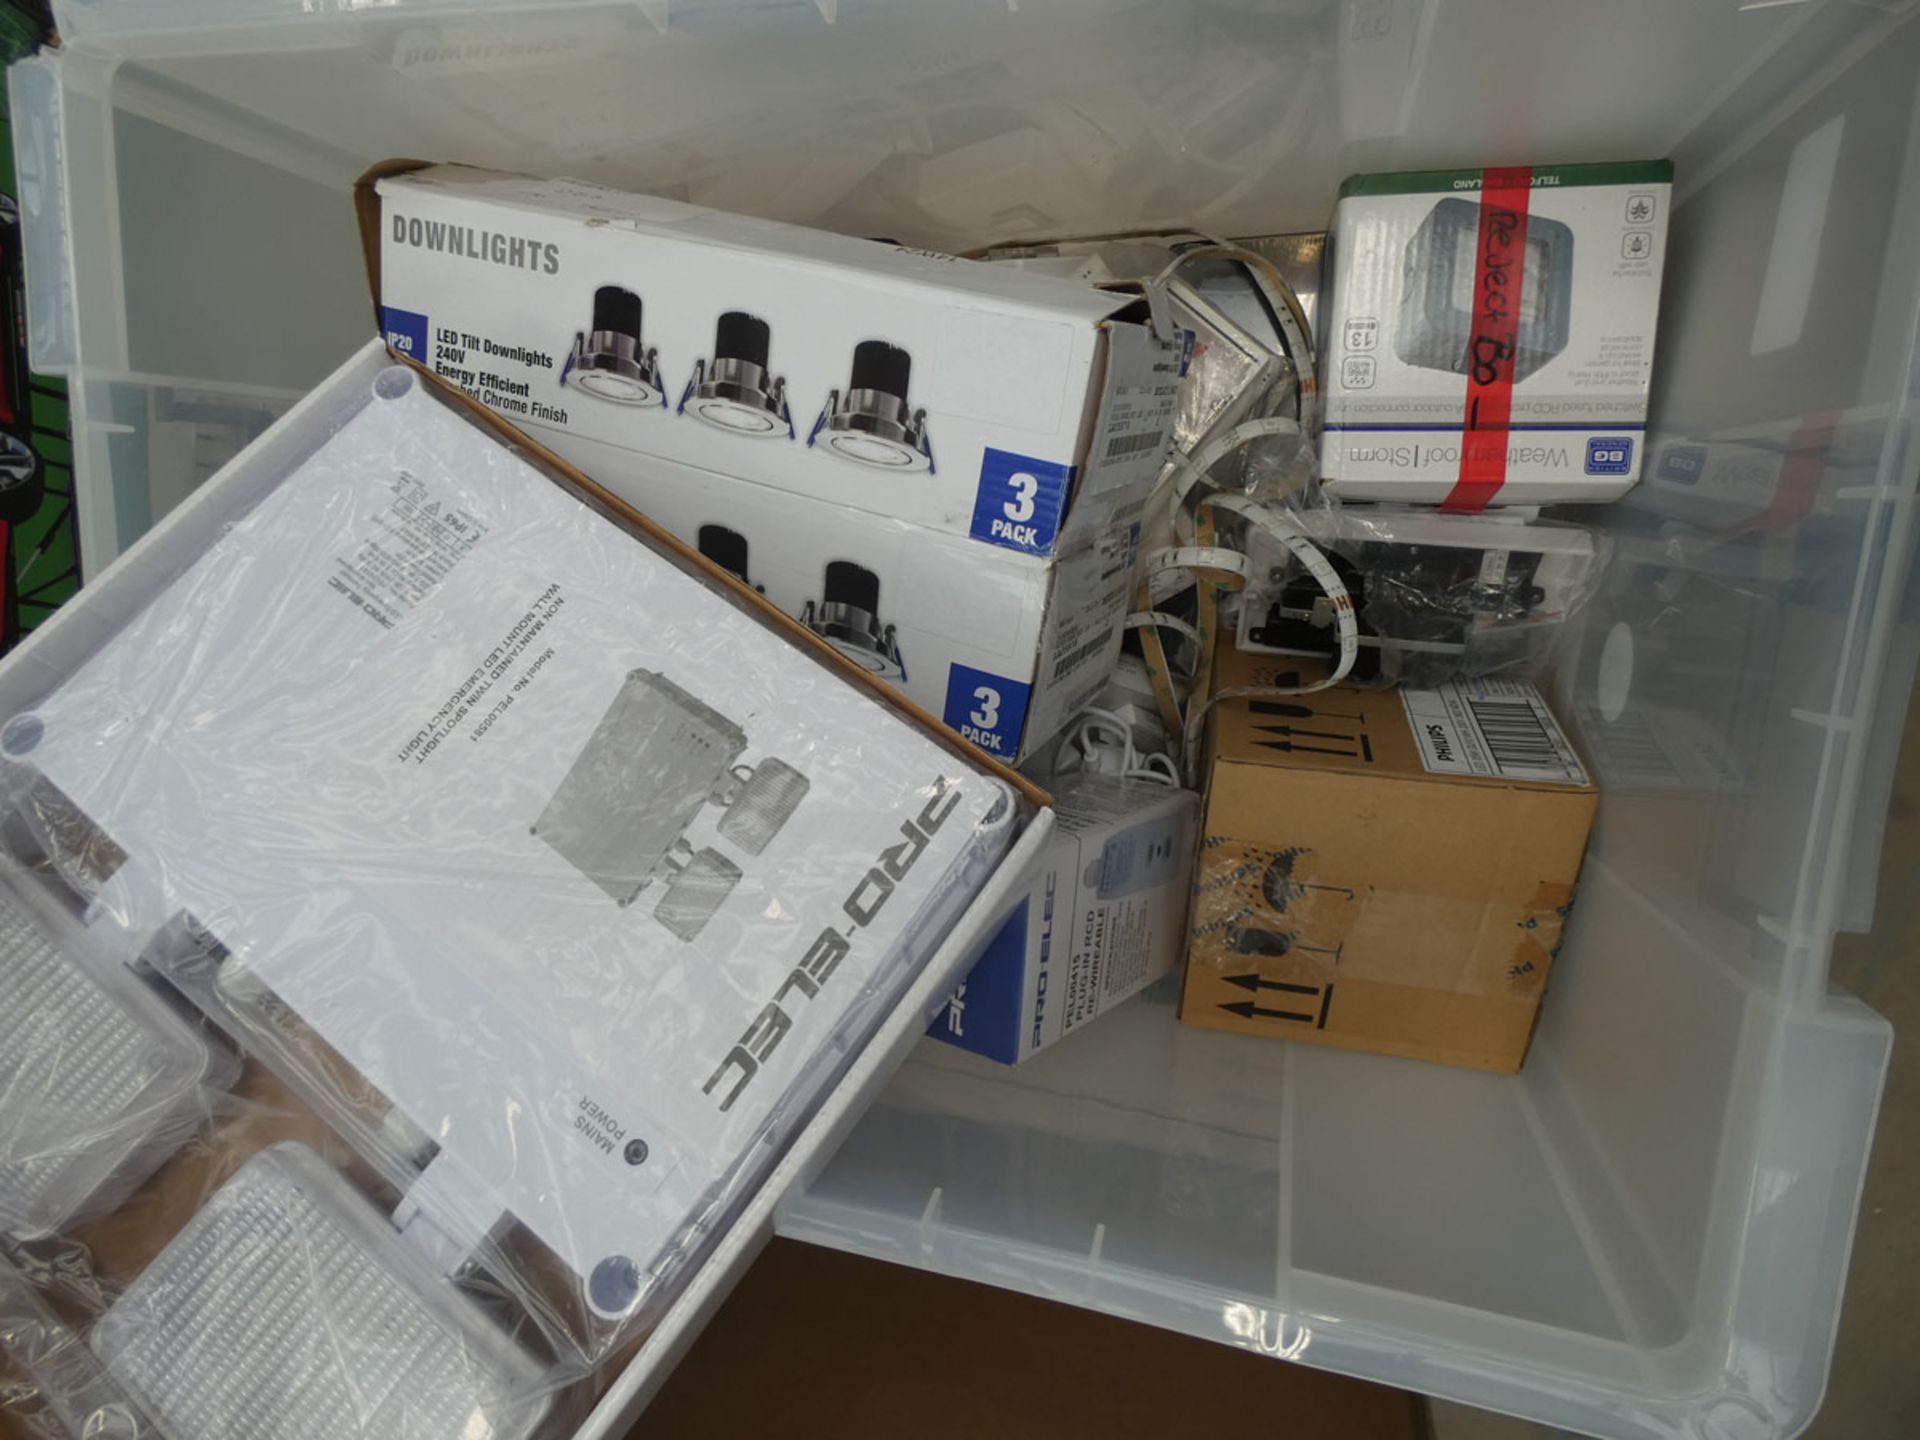 Box of downlights, weatherproof switches, plug-in RCDs, wall sockets, bulbs etc.